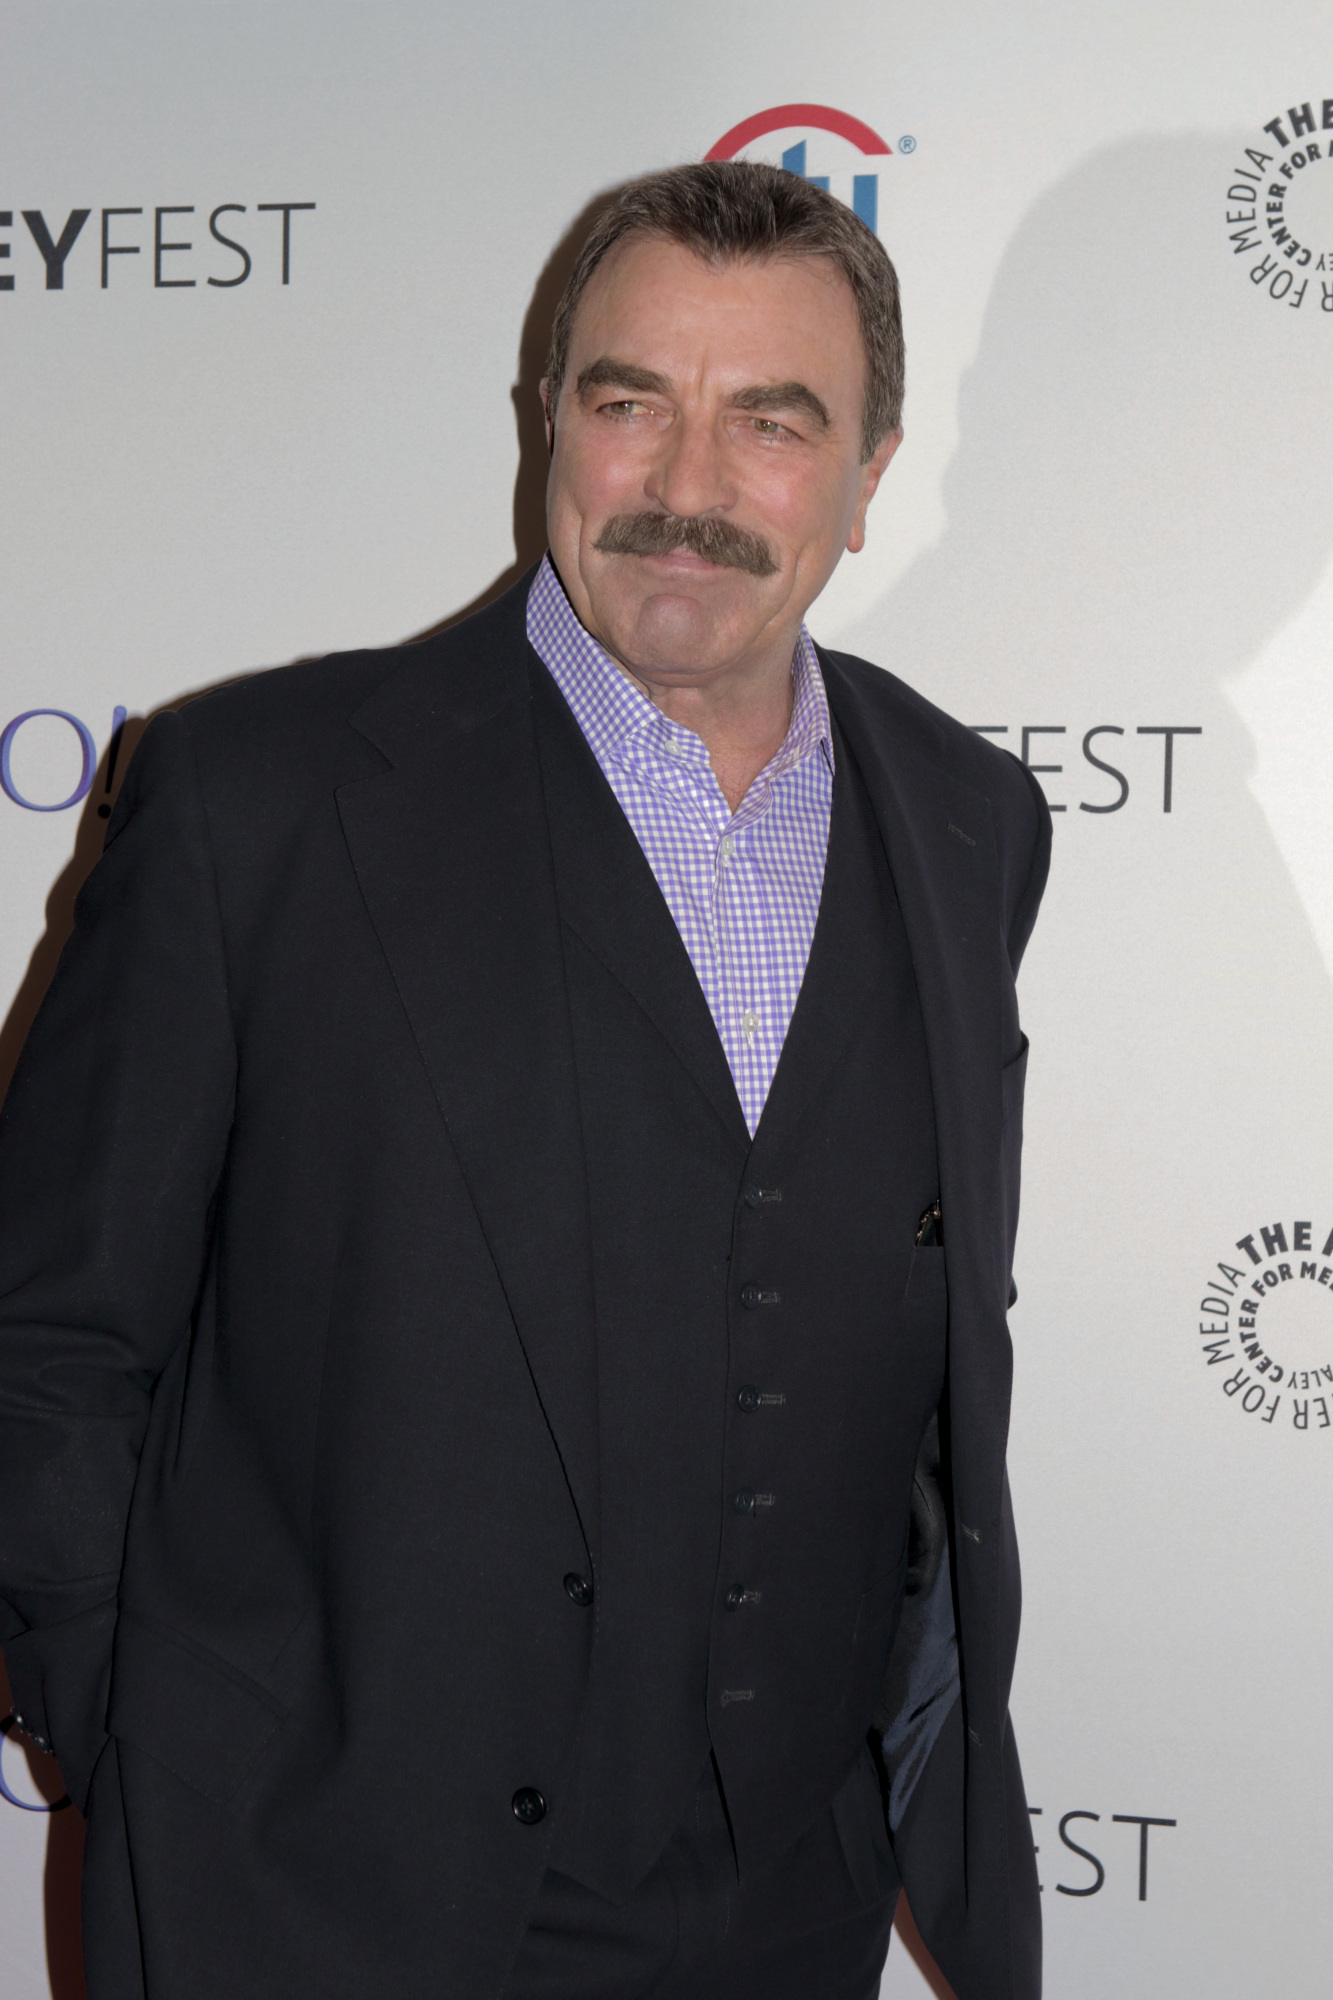 2. Tom Selleck glancing in your direction is reason enough. 